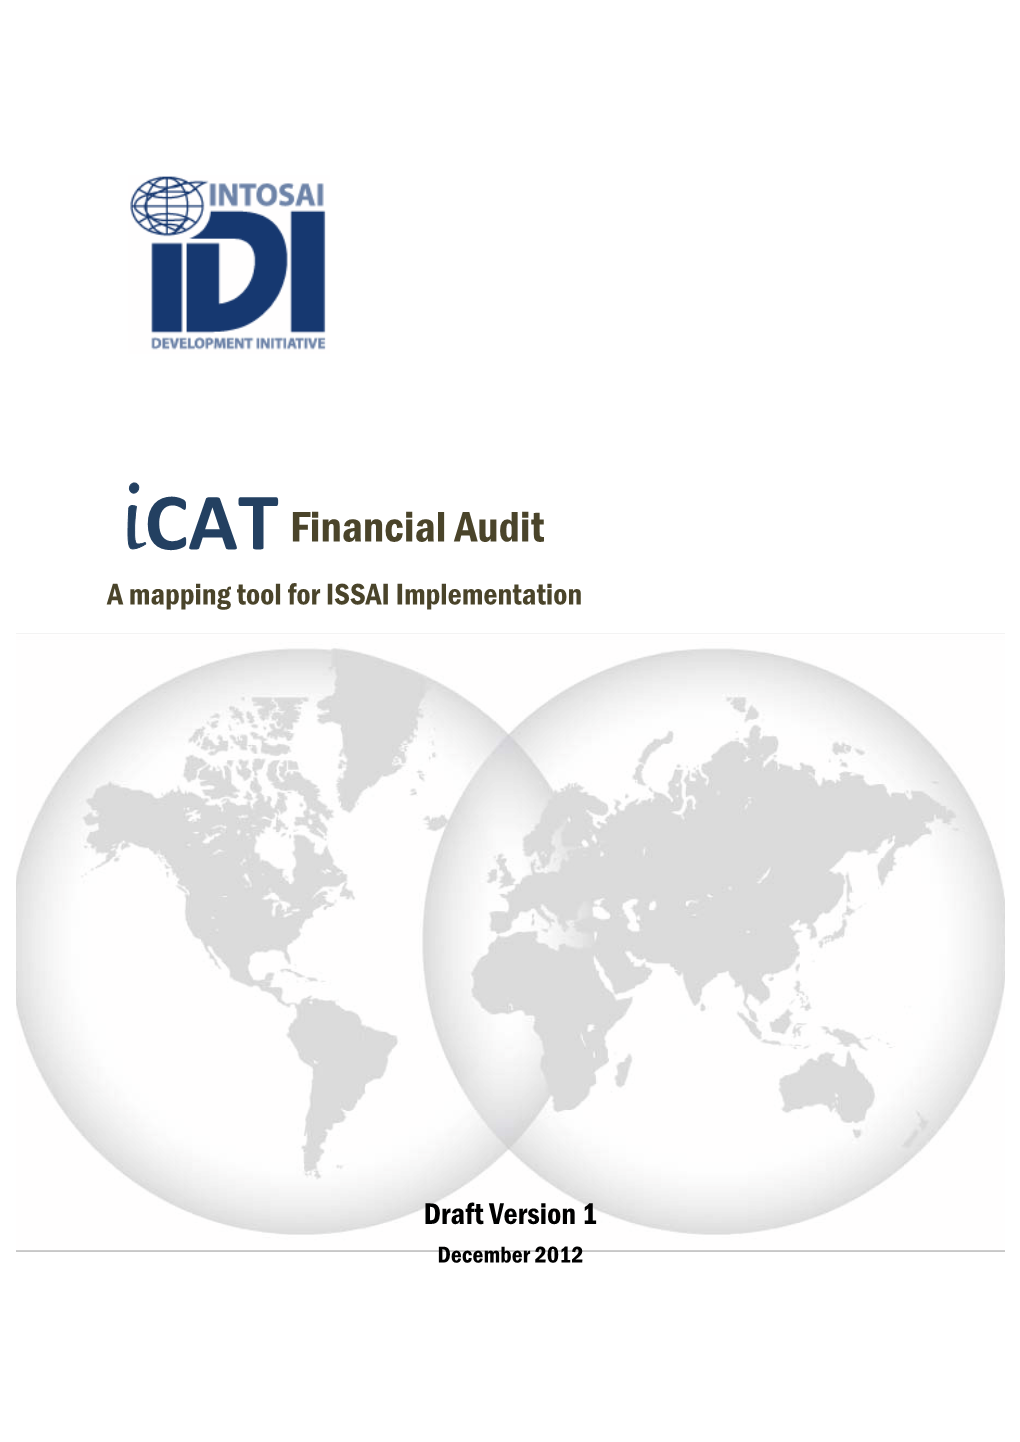 Icat a Mapping Tool for ISSAI Implementation